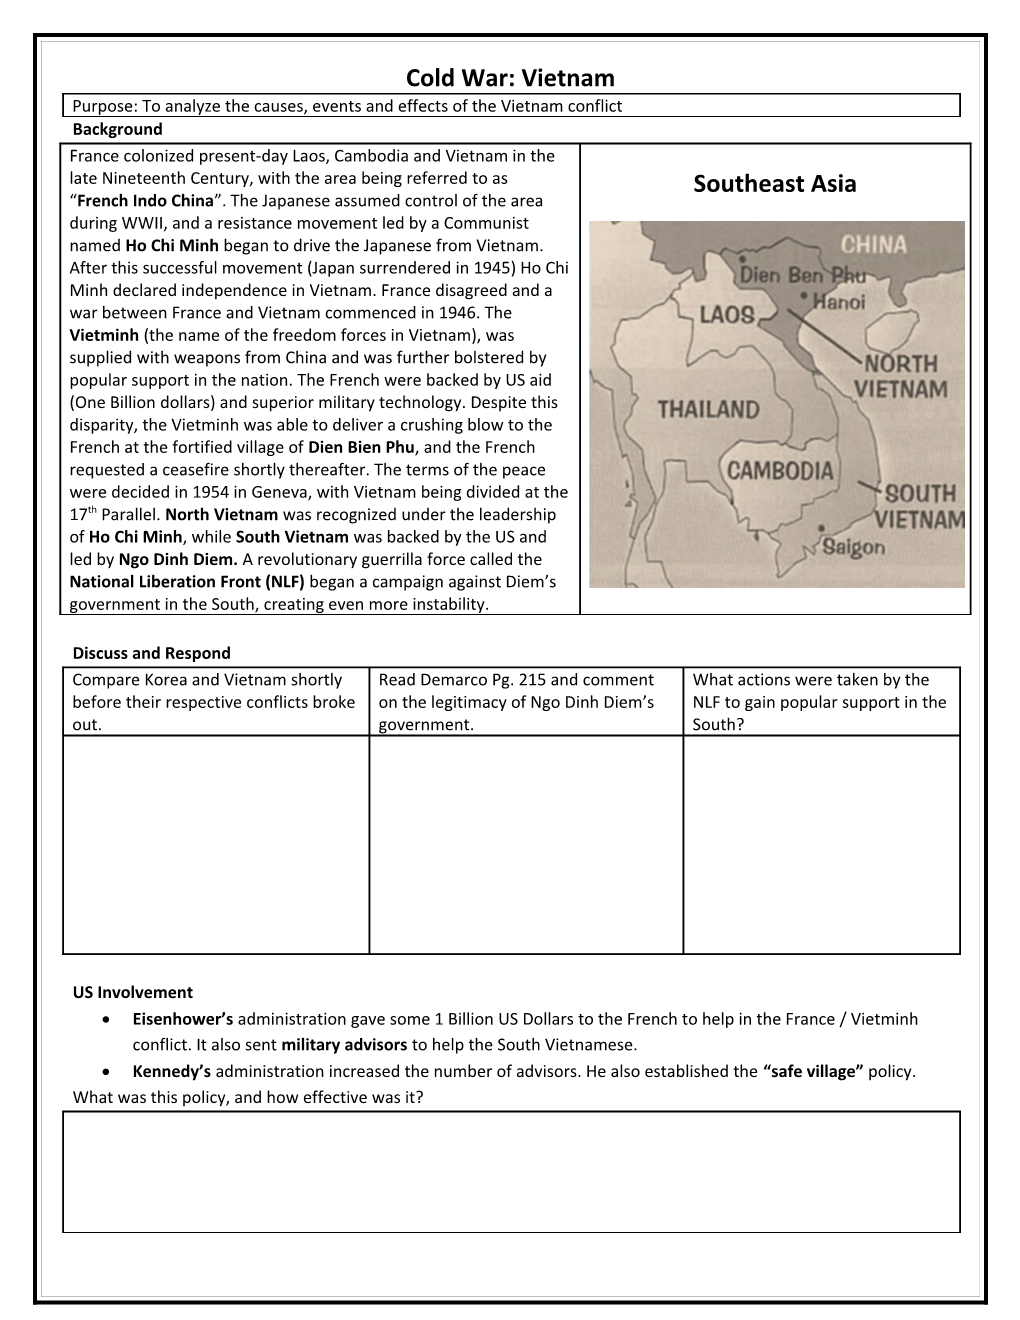 Purpose: to Analyze the Causes, Events and Effects of the Vietnam Conflict